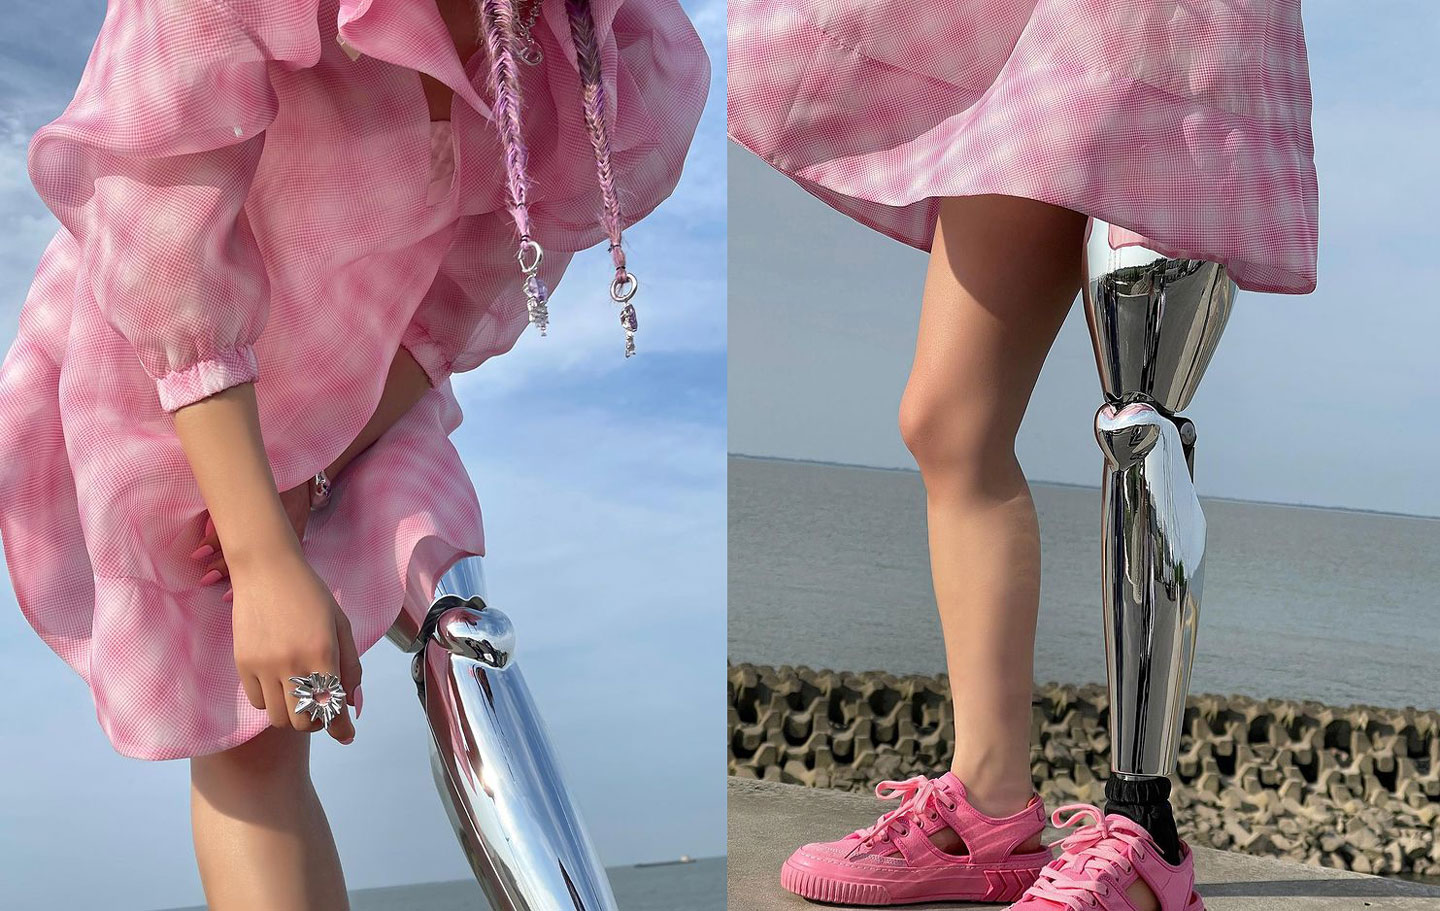 Xiao Yang is an influencer from Chengdu, China, who started a punk/pink revolution with her prosthetic leg. 